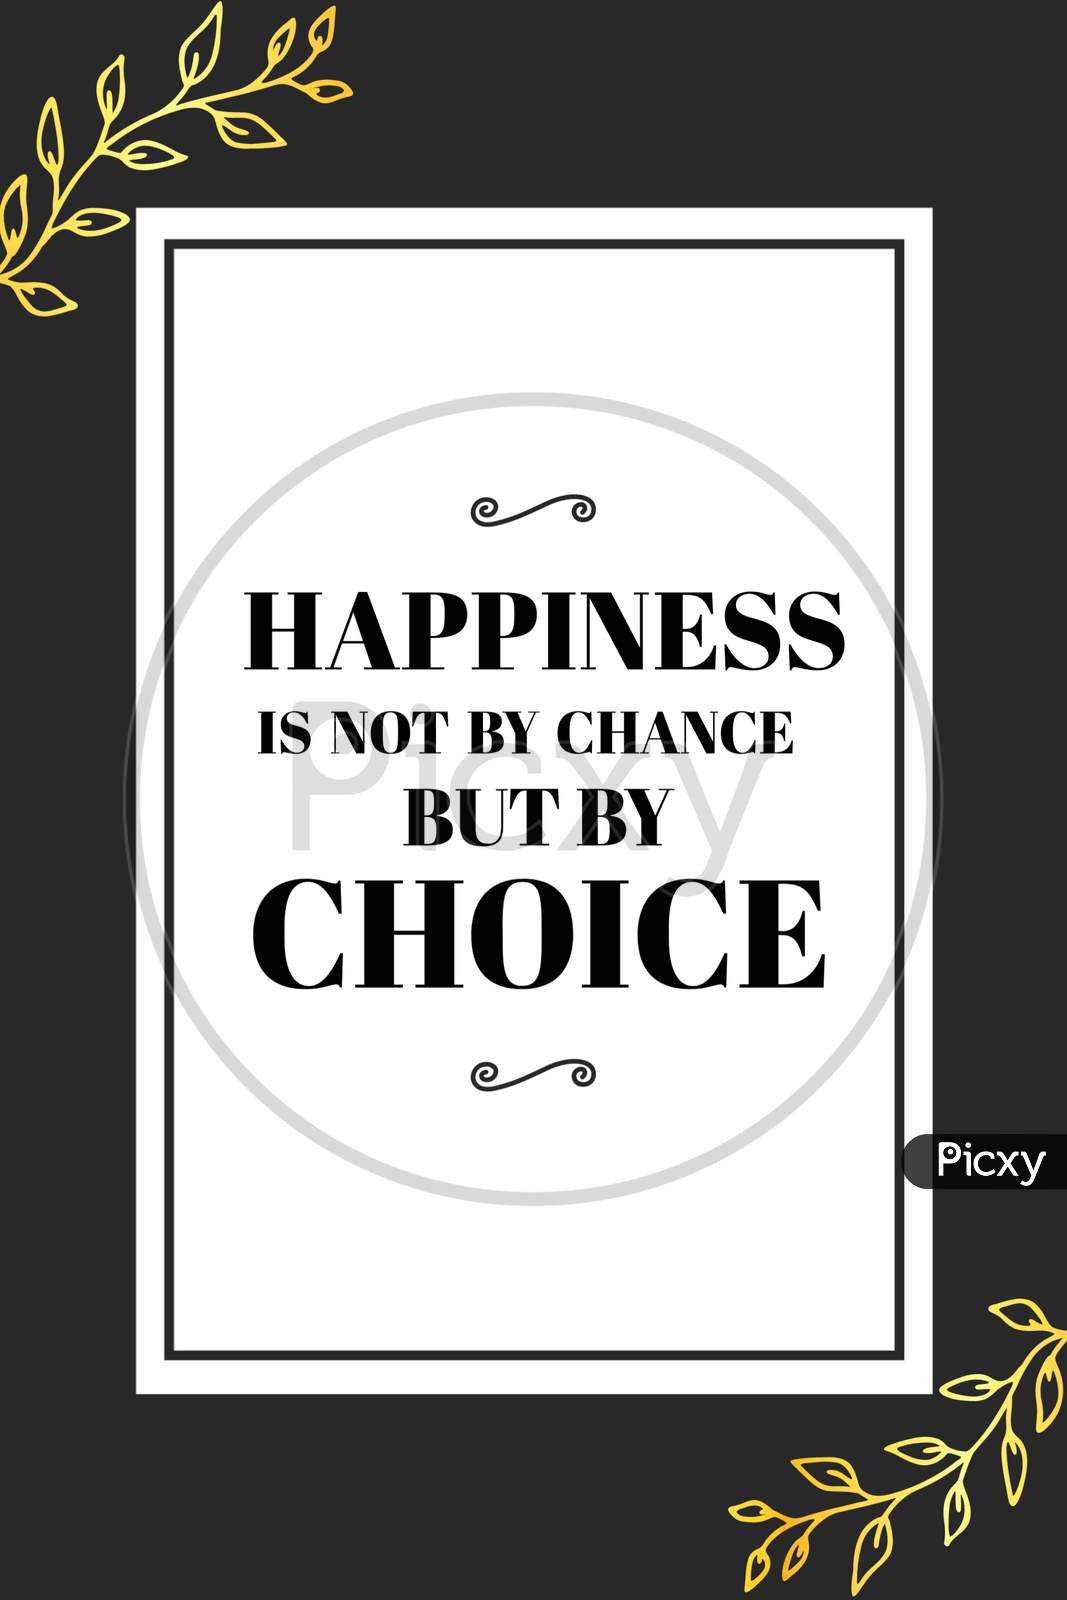 Happiness Is Not By Chance But By Choice (white frame with black background)